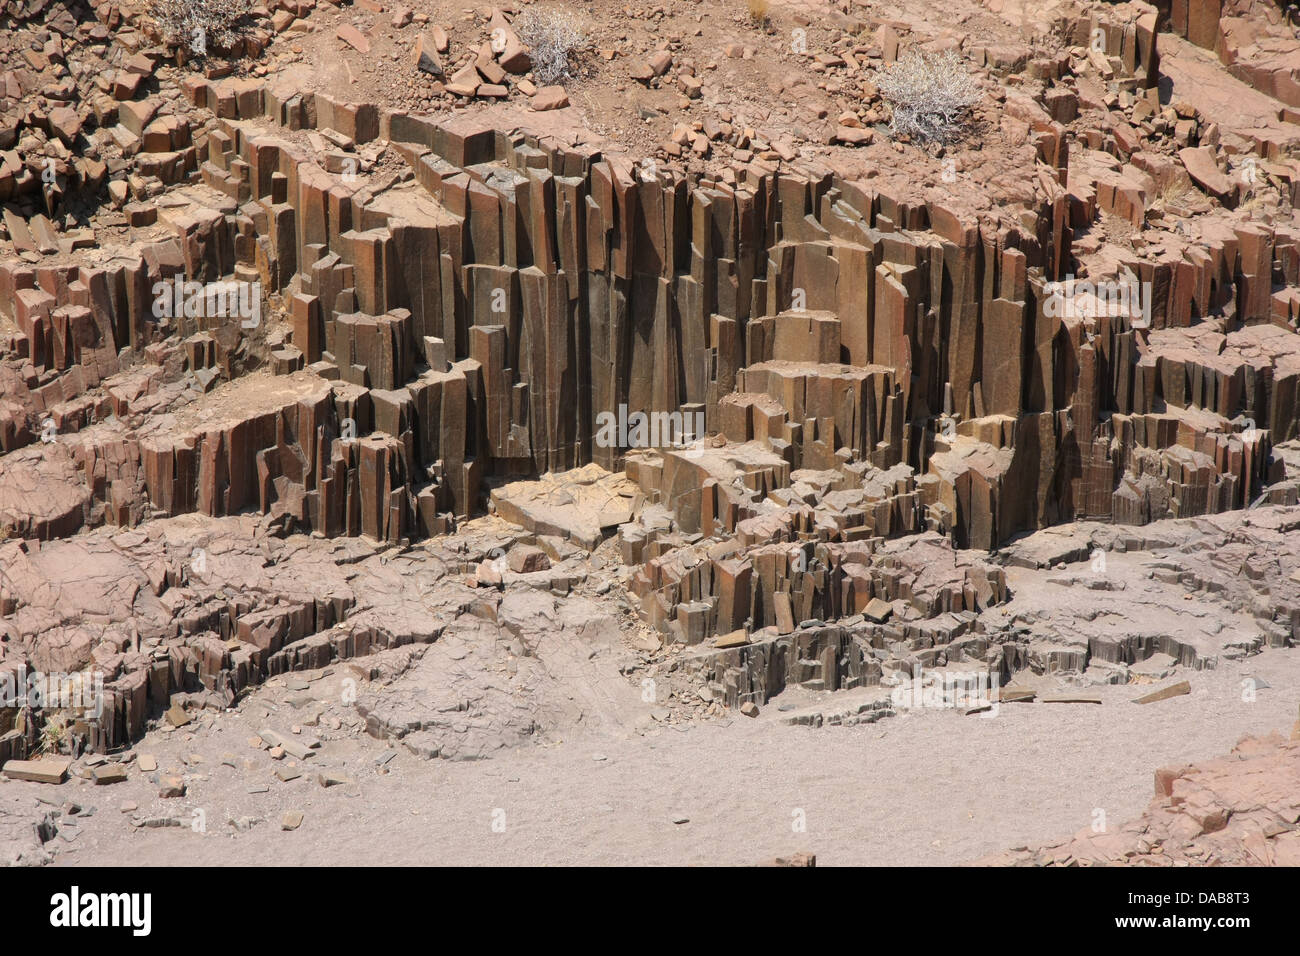 Organ Pipes Canyon in Namibia, formed of hundreds of angular dolerite columns up to 5 metres high Stock Photo